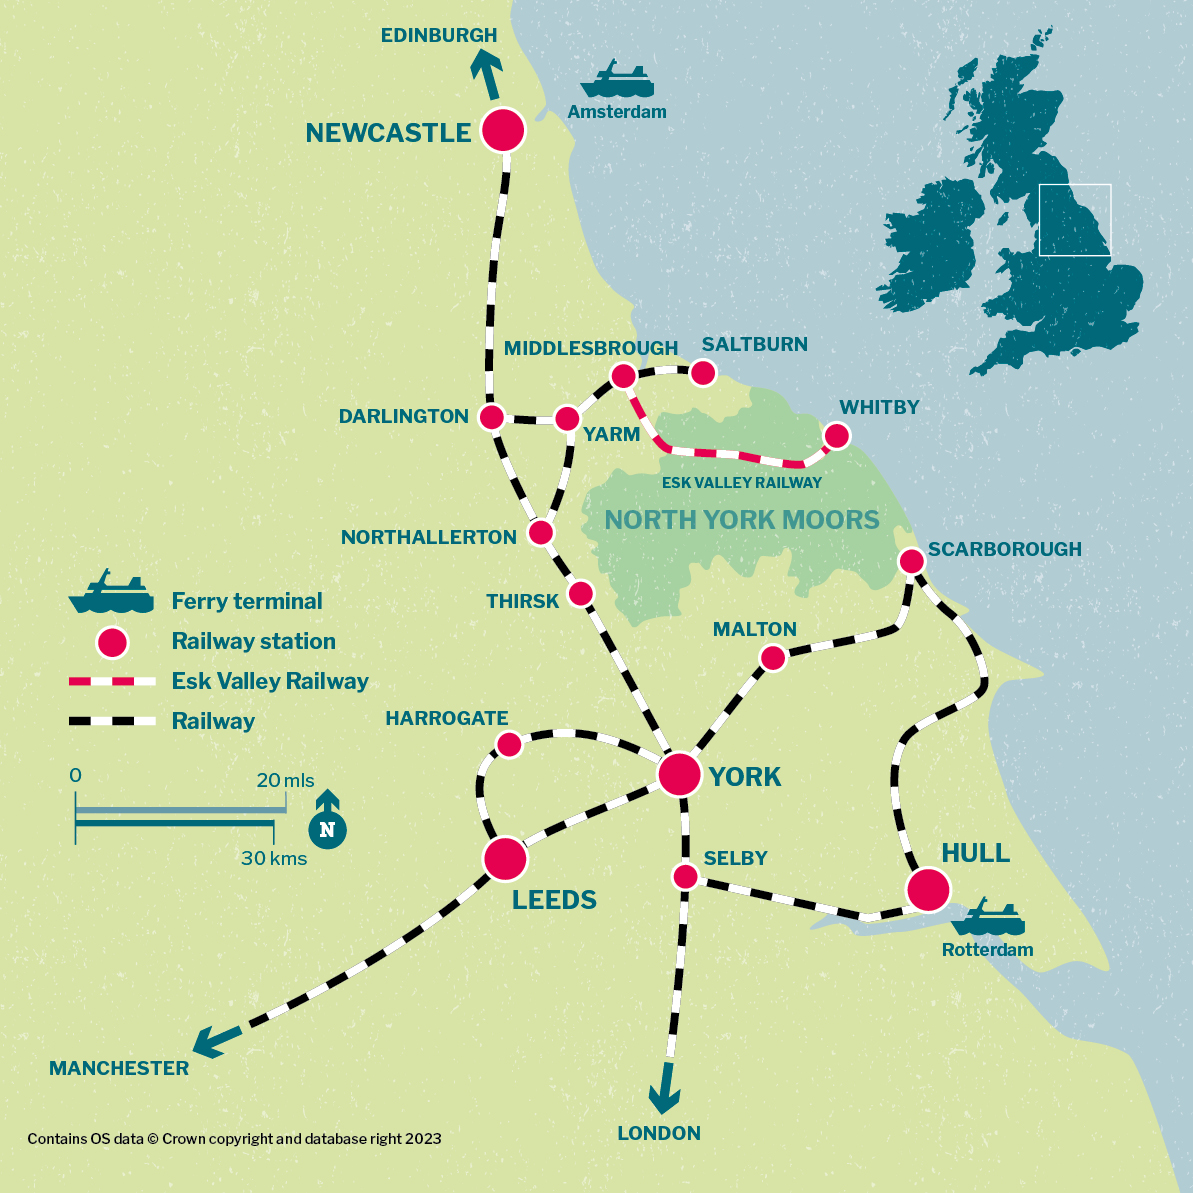 Map showing rail and ferry access routes to the North York Moors area
  The North York Moors are accessible via car ferry at Hull from Rotterdam and Newcastle from Amsterdam from where rail services are available. The area can also be accessed using rail services from Edinburgh in the north via Newcastle and accessed from London in the south. Rail access from the near south, west and south east is available via Manchester, Leeds, York, Harrogate, Malton, Hull and Scarborough. North and eastern rail access is available via stations at Thirsk, Northallerton, Darlington, Yarm, Middlesbrough, Saltburn and Whitby.
  Map © Crown copyright and database rights 2023 Ordnance Survey AC0000813300